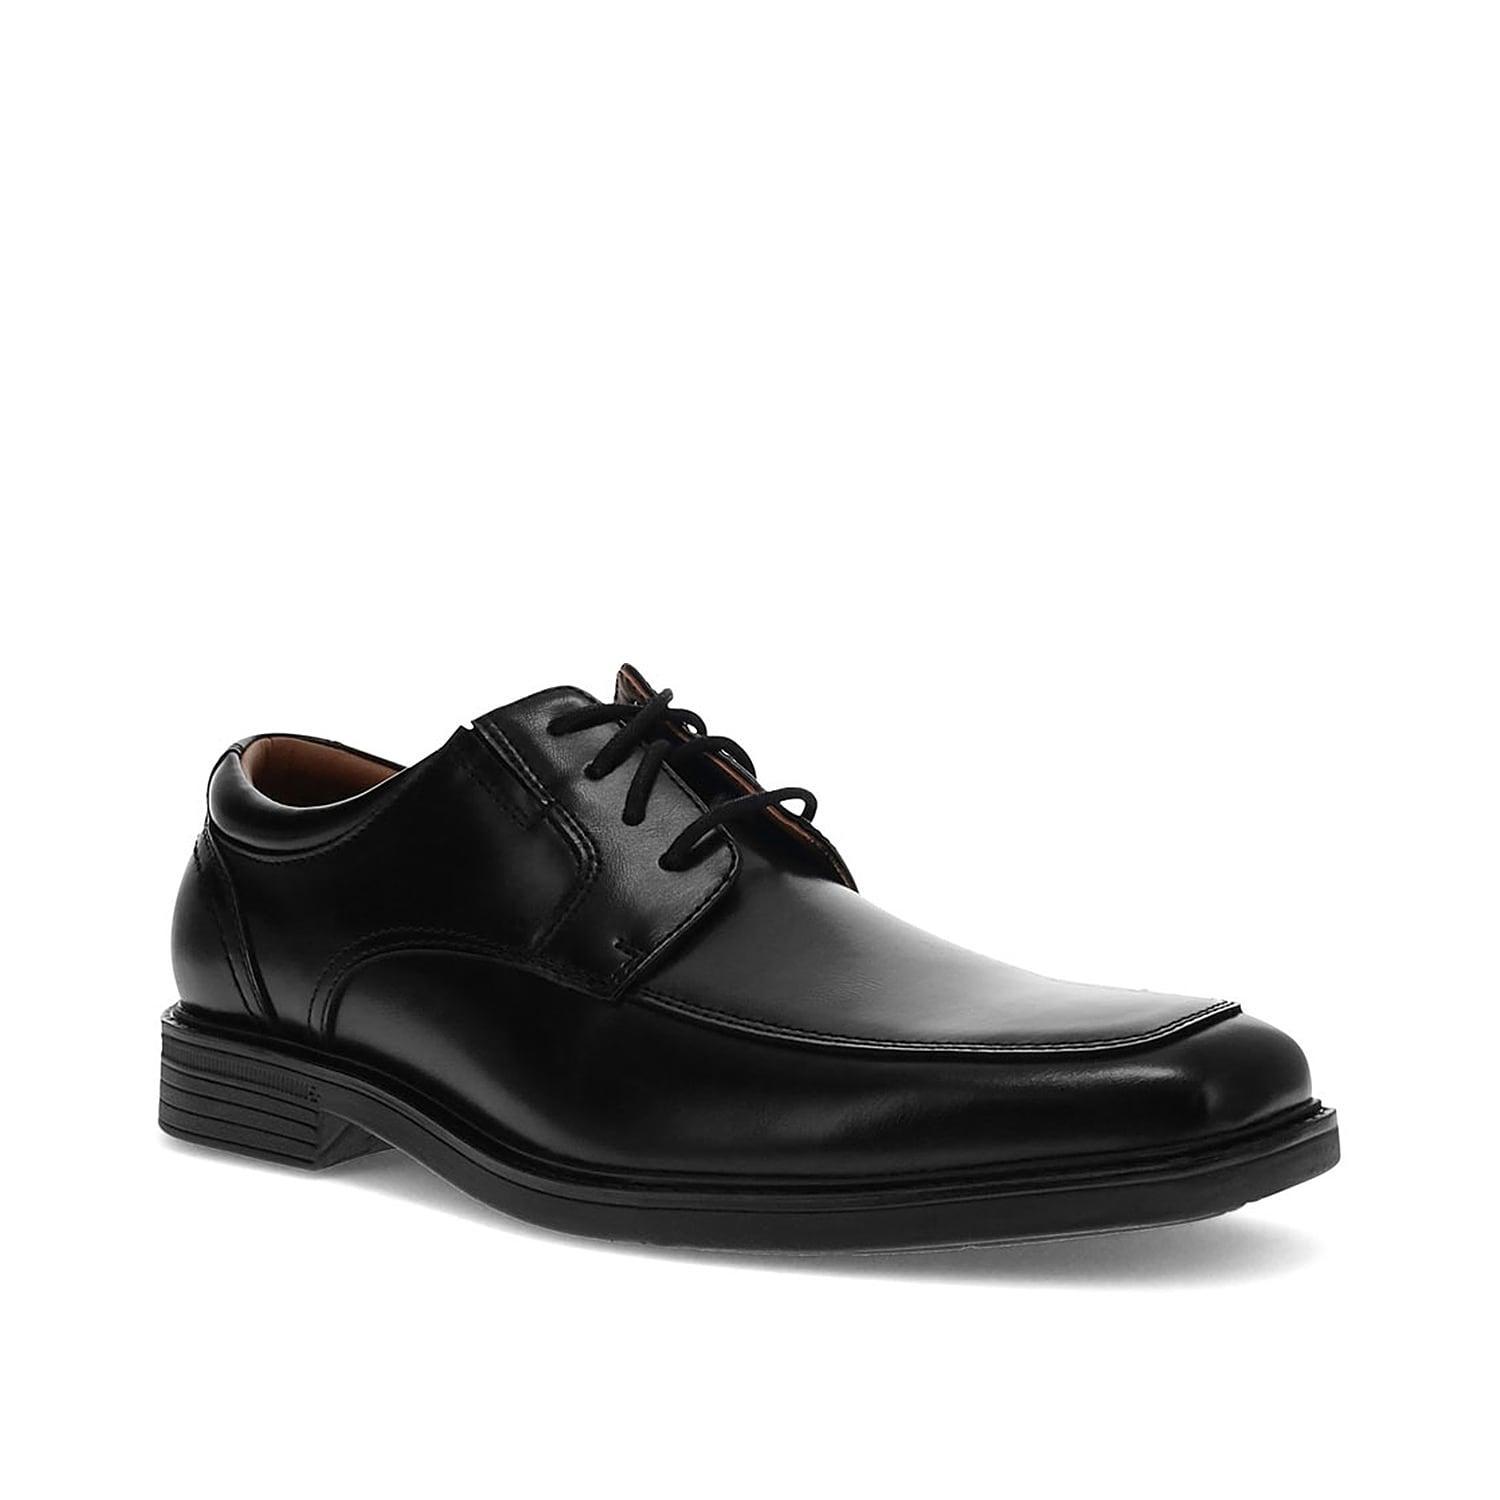 Dockers Simmons Mens Oxford Dress Shoes Brown Product Image